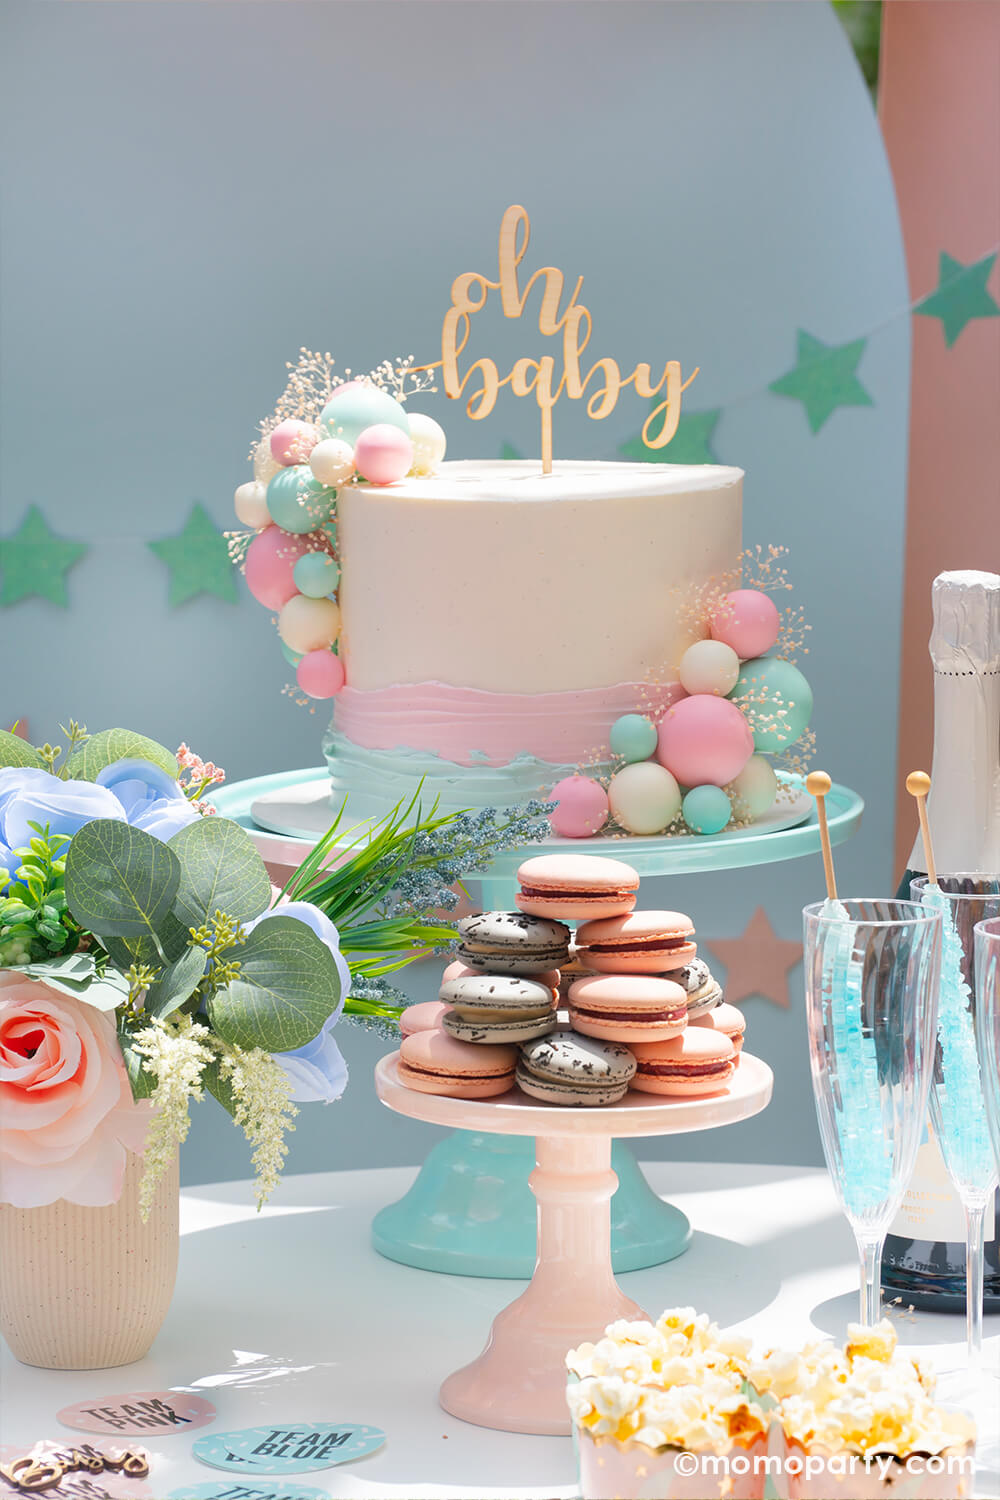 A modern gender reveal cake inspired by an organic balloon arch designs topped with Party Deco's wooden oh baby cake topper, on the side is a pile of blue and pink french macaroon and bubbly drinks in pink and blue, perfect inspiration for a modern baby gender reveal party